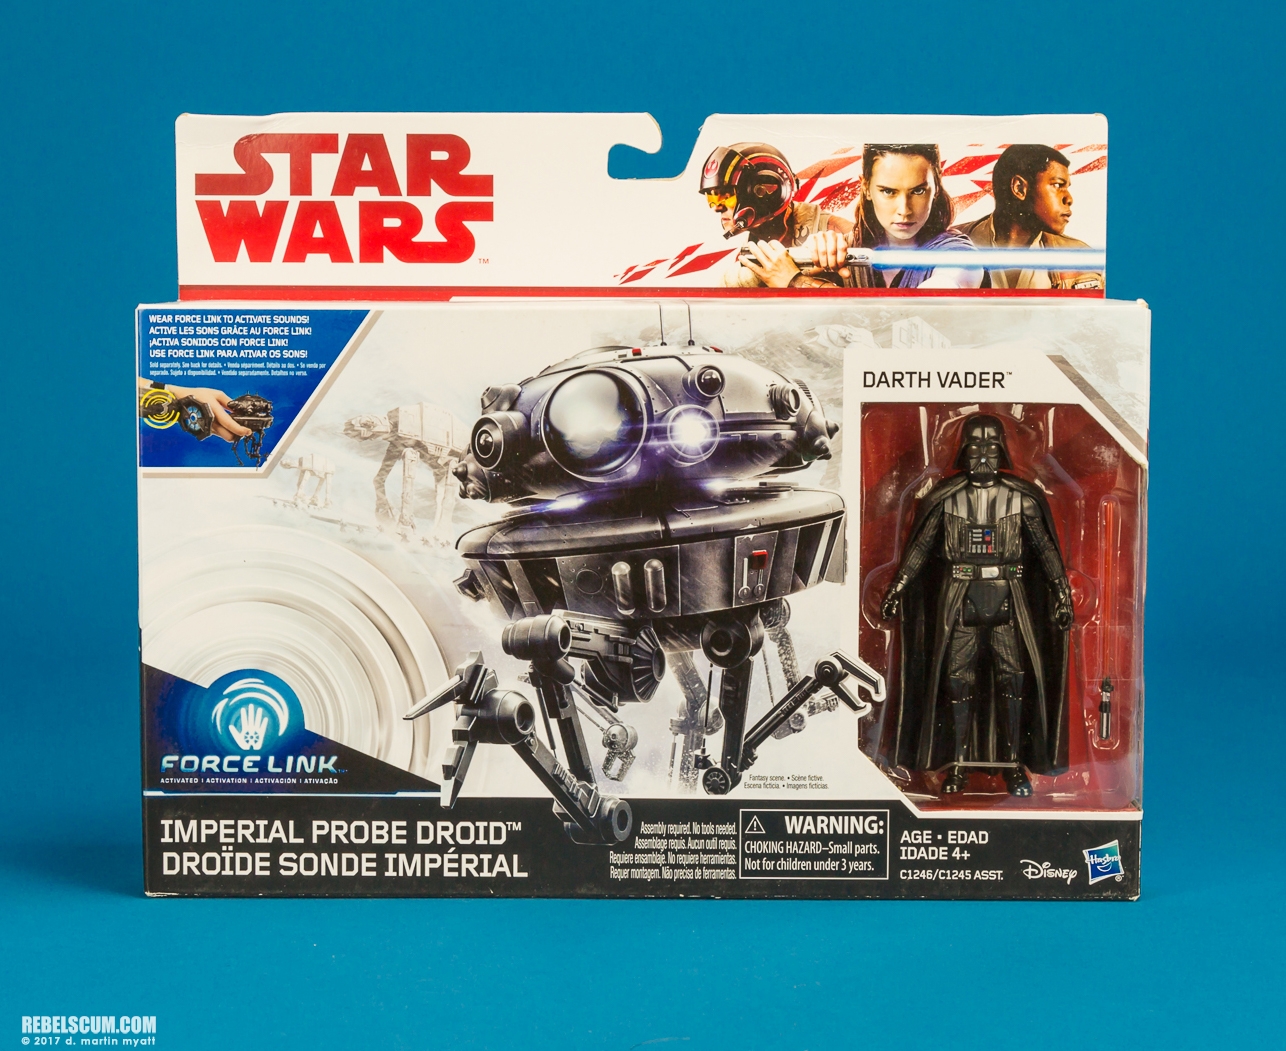 Imperial-Probe-Droid-Darth-Vader-Two-Pack-Hasbro-014.jpg